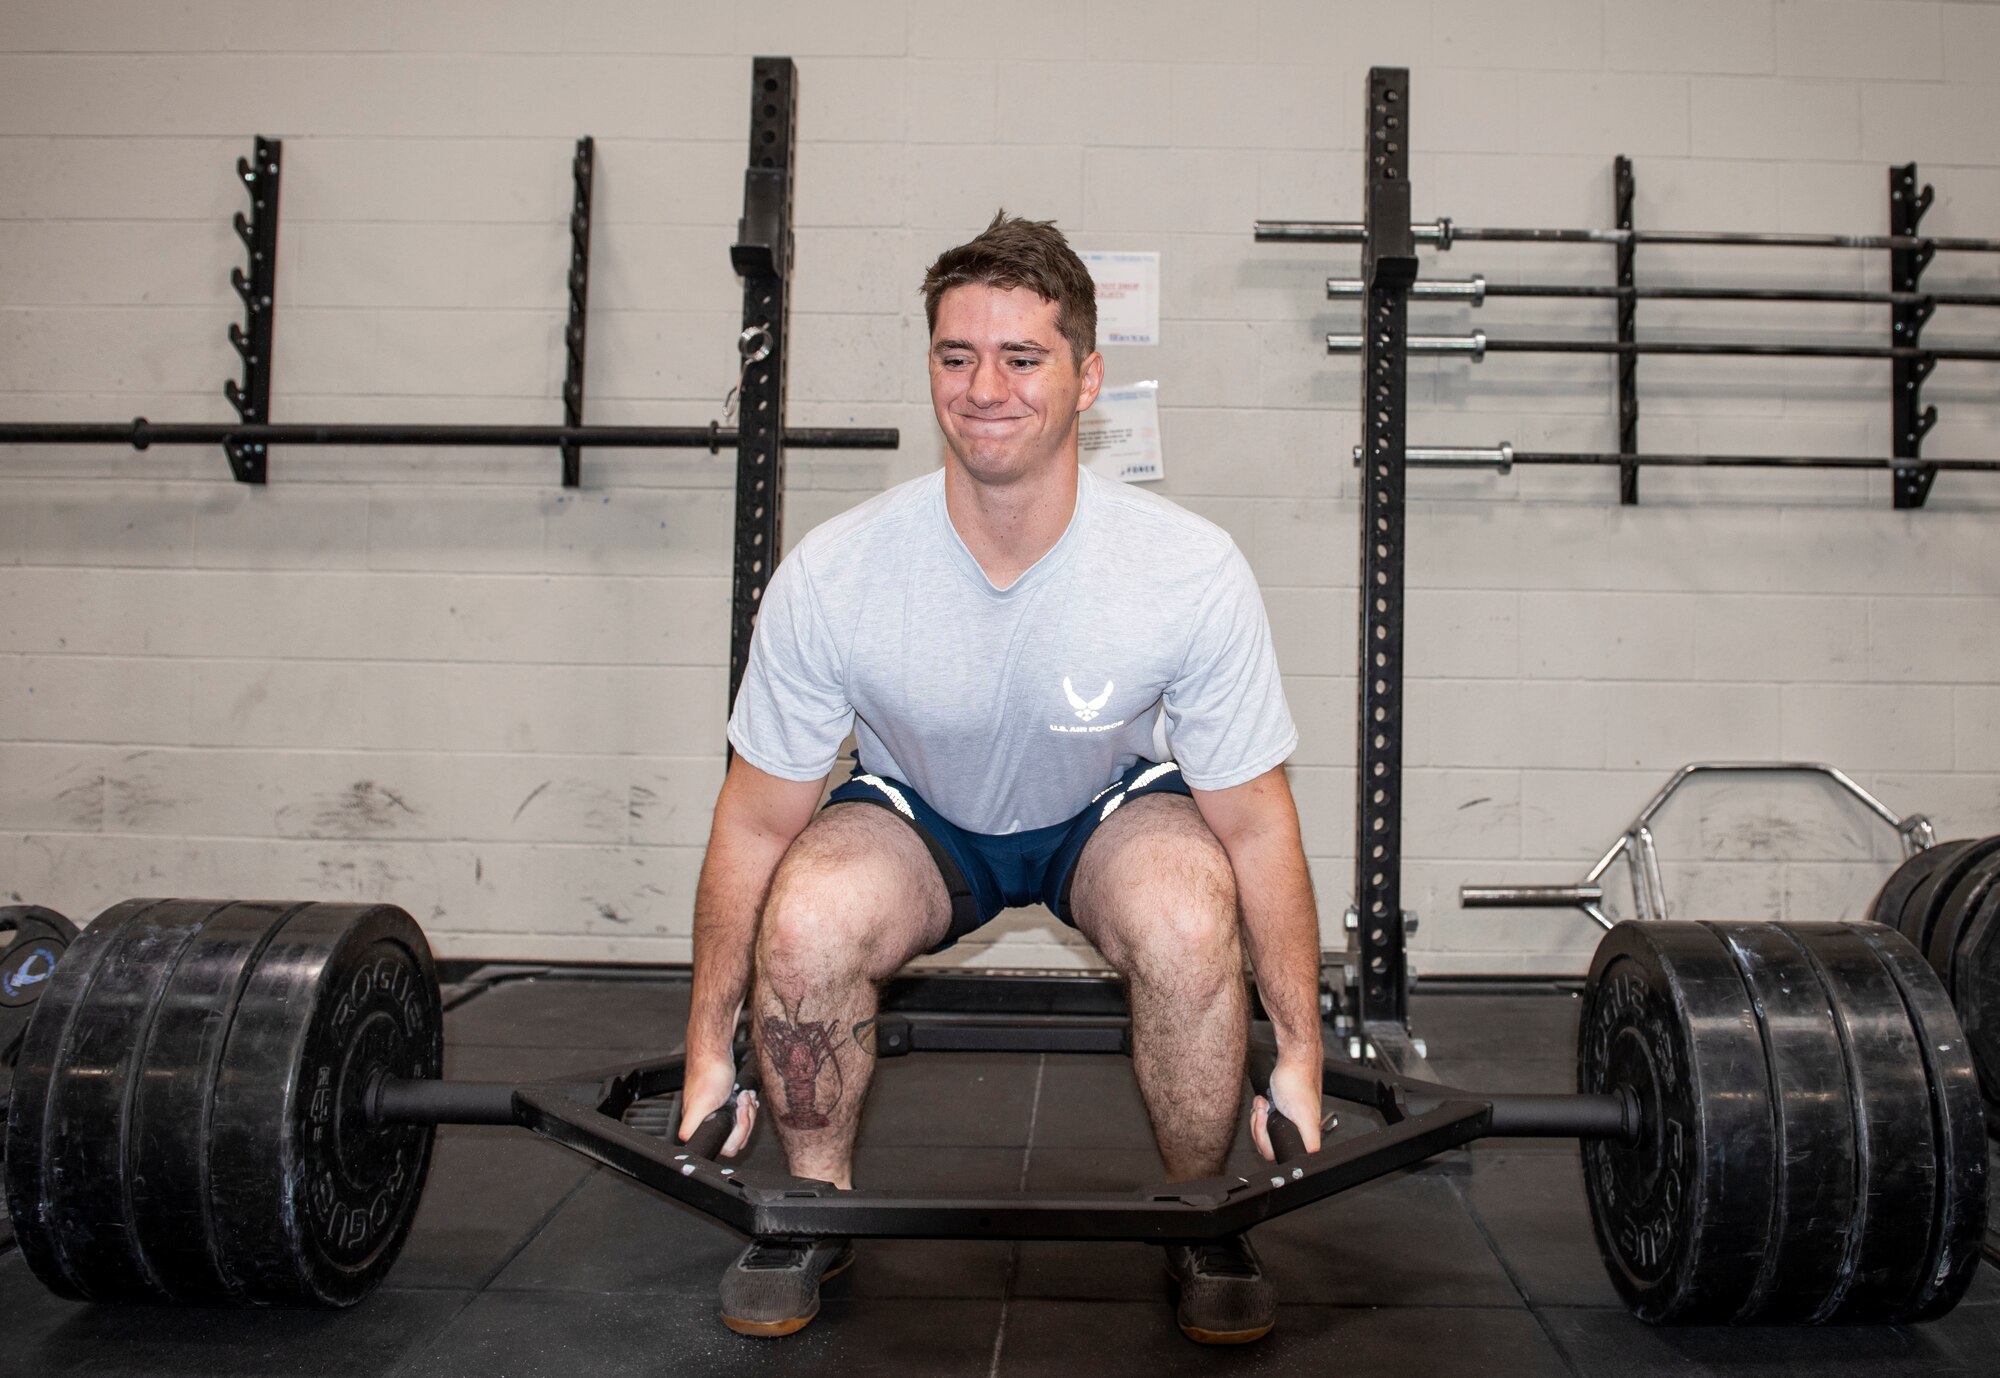 U.S. Air Force Senior Airman Zachery Stringer, 20th Civil Engineer Squadron, Explosive Ordnance Disposal (EOD) flight technician, performs a trap bar deadlift during the EOD Tier 2 fitness practice test, at Shaw Air Force Base, South Carolina, Oct.4, 2019.